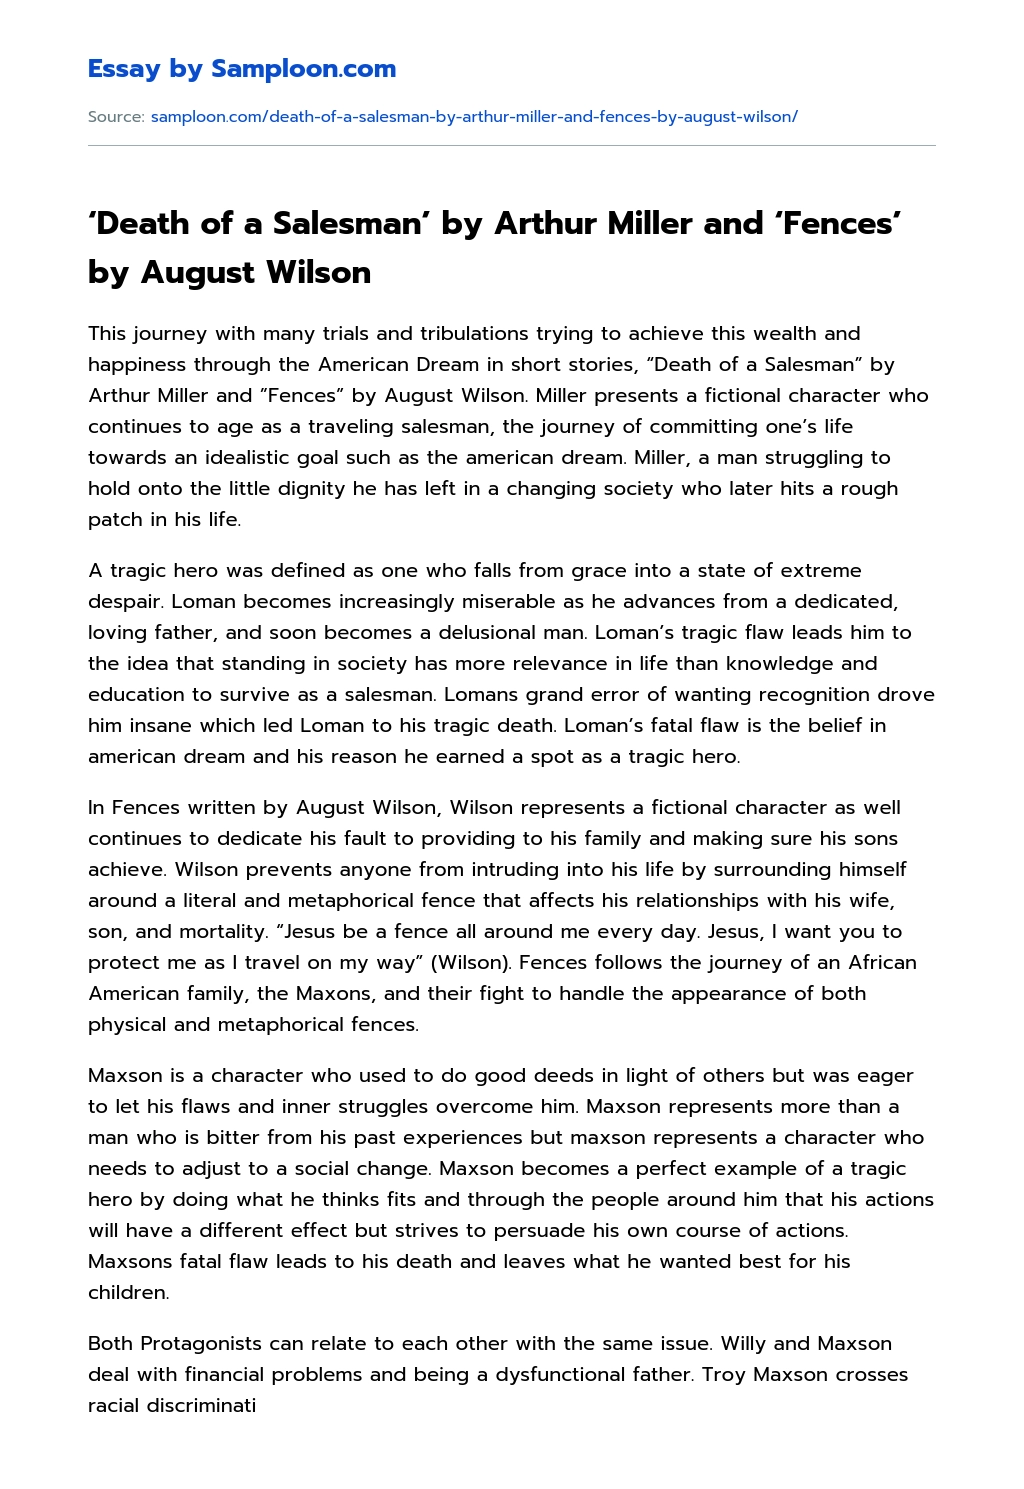 Death of a Salesman’ by Arthur Miller and ‘Fences’ by August Wilson Summary essay